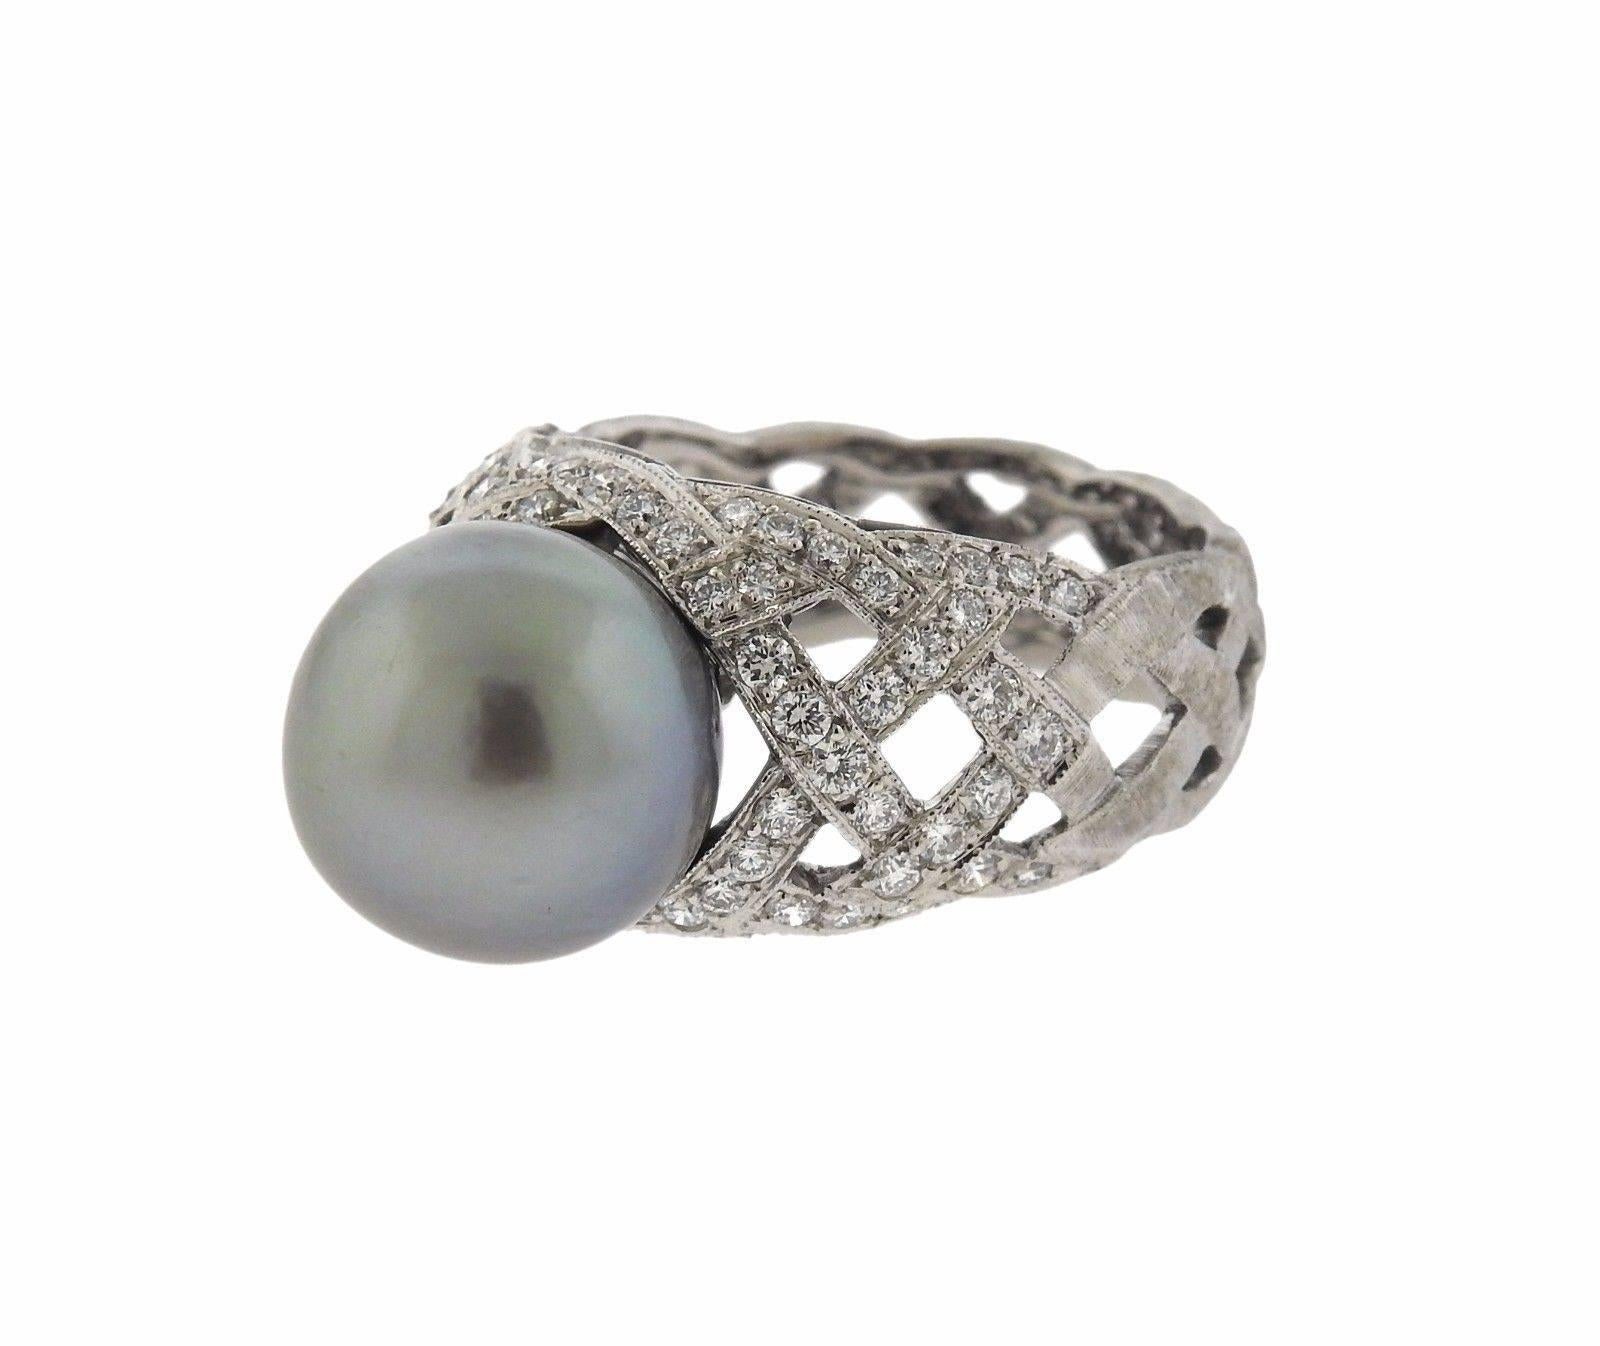 An 18k white gold ring set with a 12mm pearl and approximately 0.68ctw of GH/VS diamonds.  The ring is a size 7 3/4.  The weight of the piece is 11.1 grams.  Marked: 18K, Italy,  750, Buccellati.  The current retail is $16080.